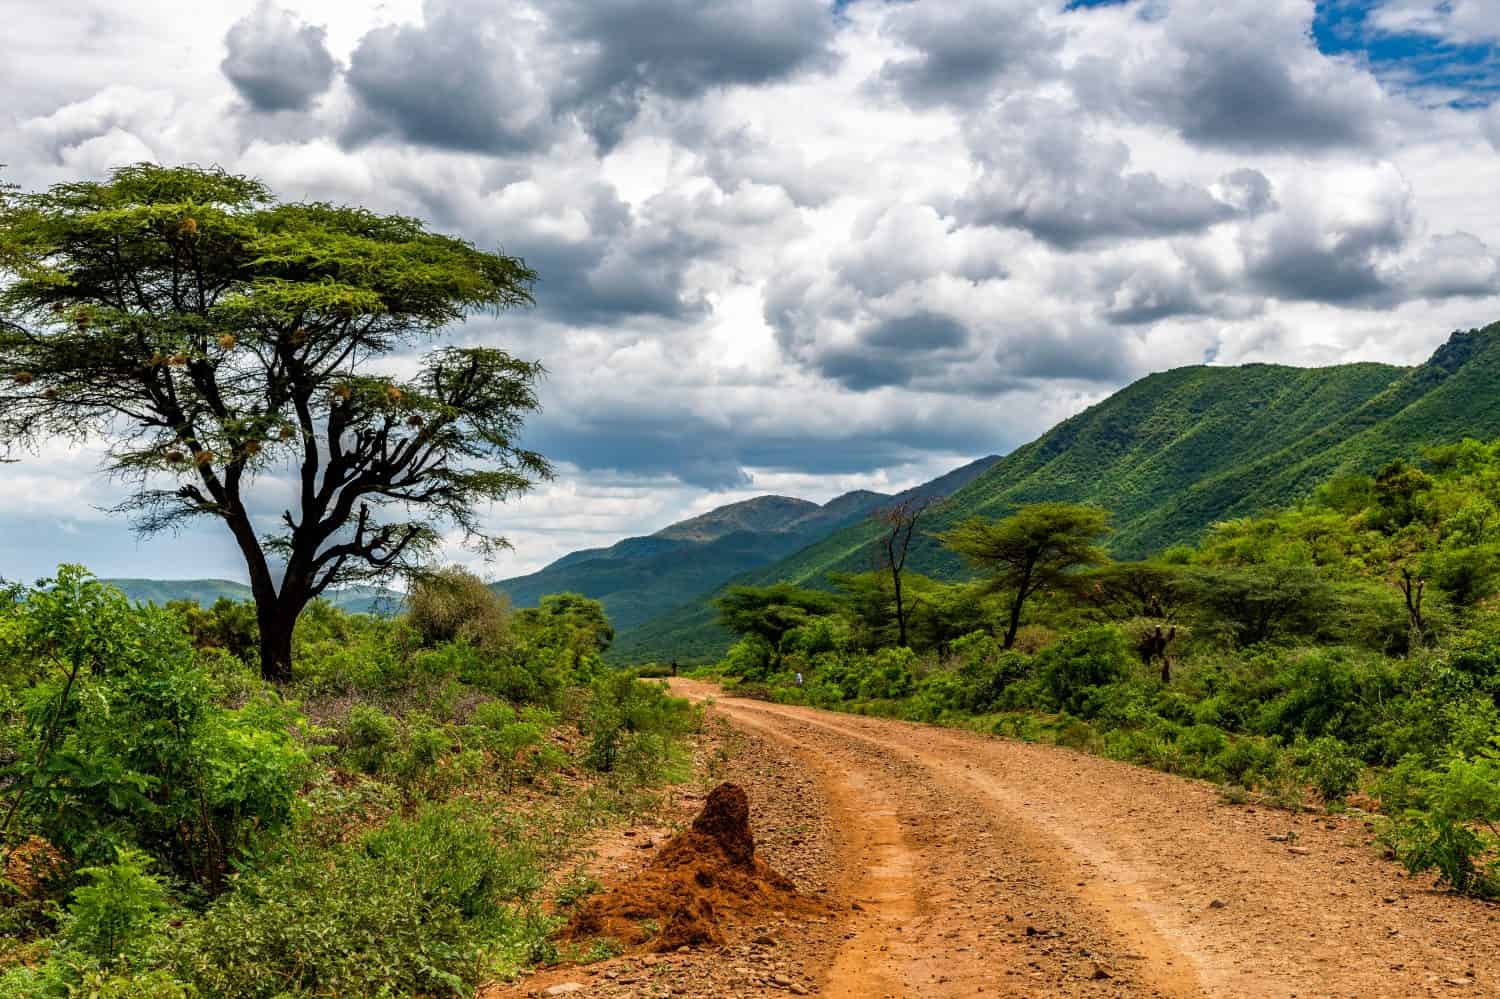 Remote rural area near Siracho Escarpment, Baringo County, Kenya looking across the Great Rift Valley. The rough dirt road is rocky and off the beaten track. Storm brewing. Natural landscape scenery.